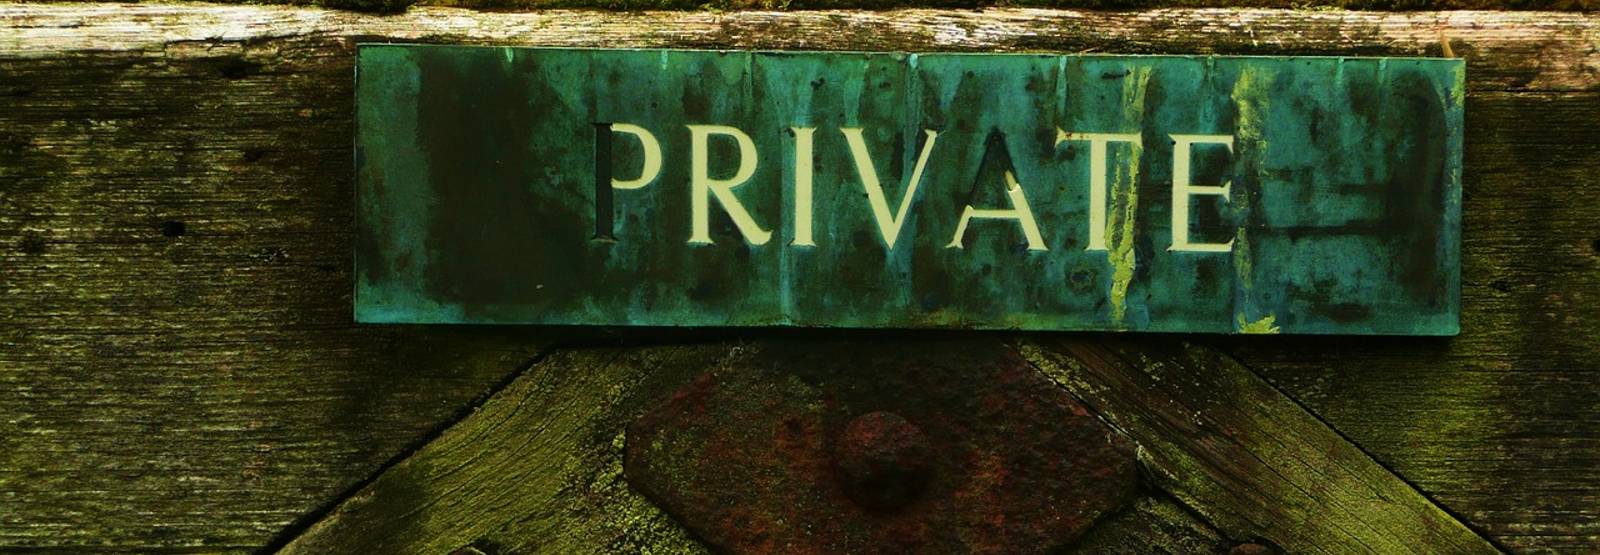 hanging sign that reads "private"